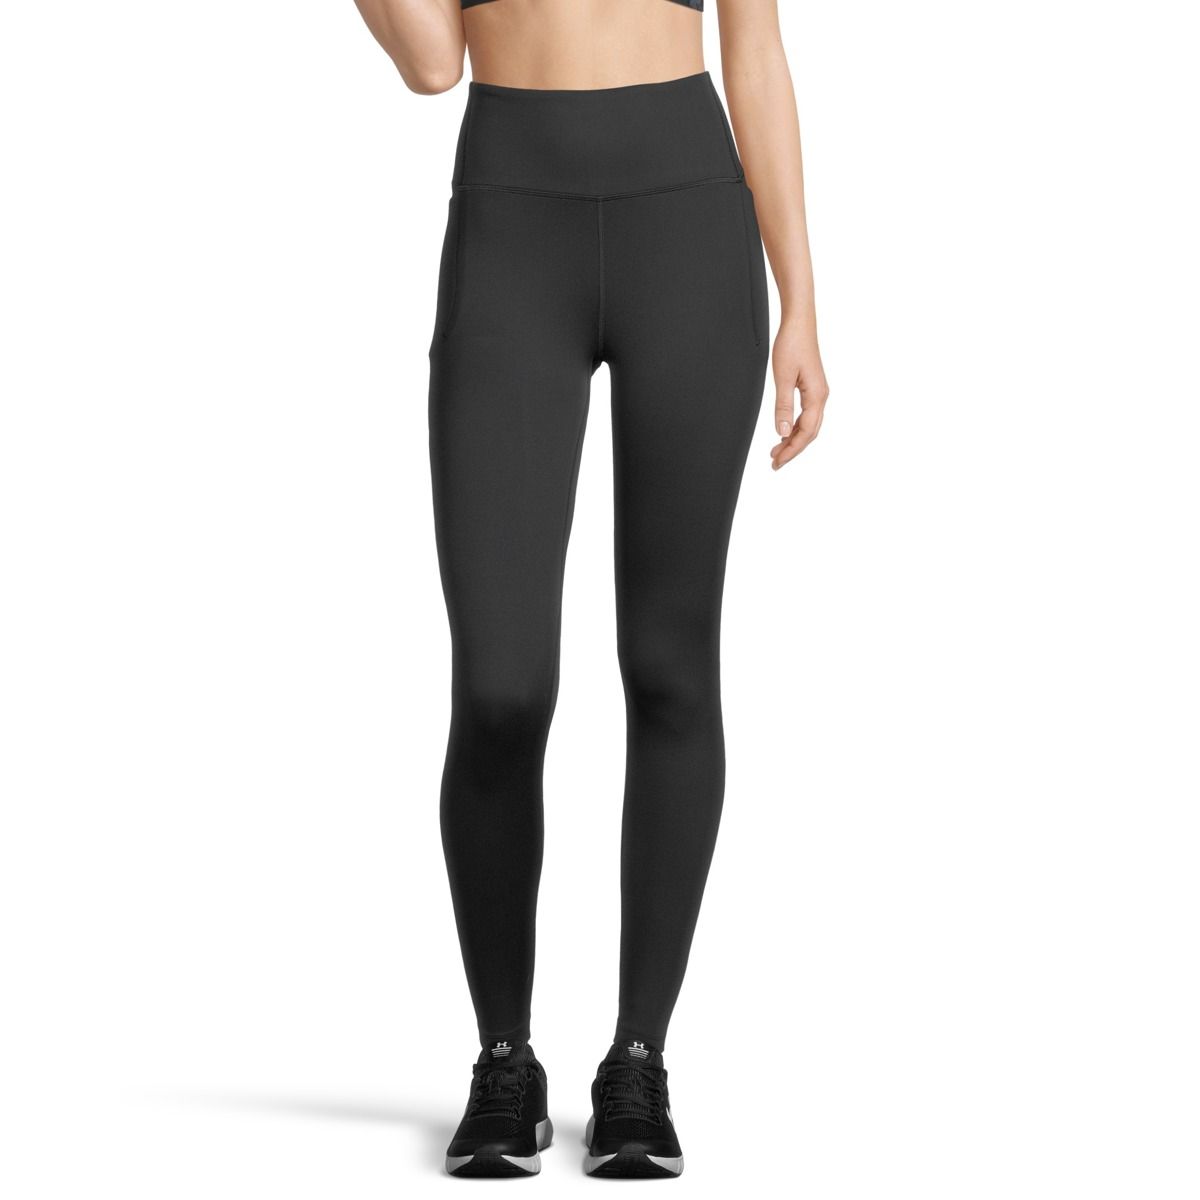 Under Armour Women's Meridian Cold Tights